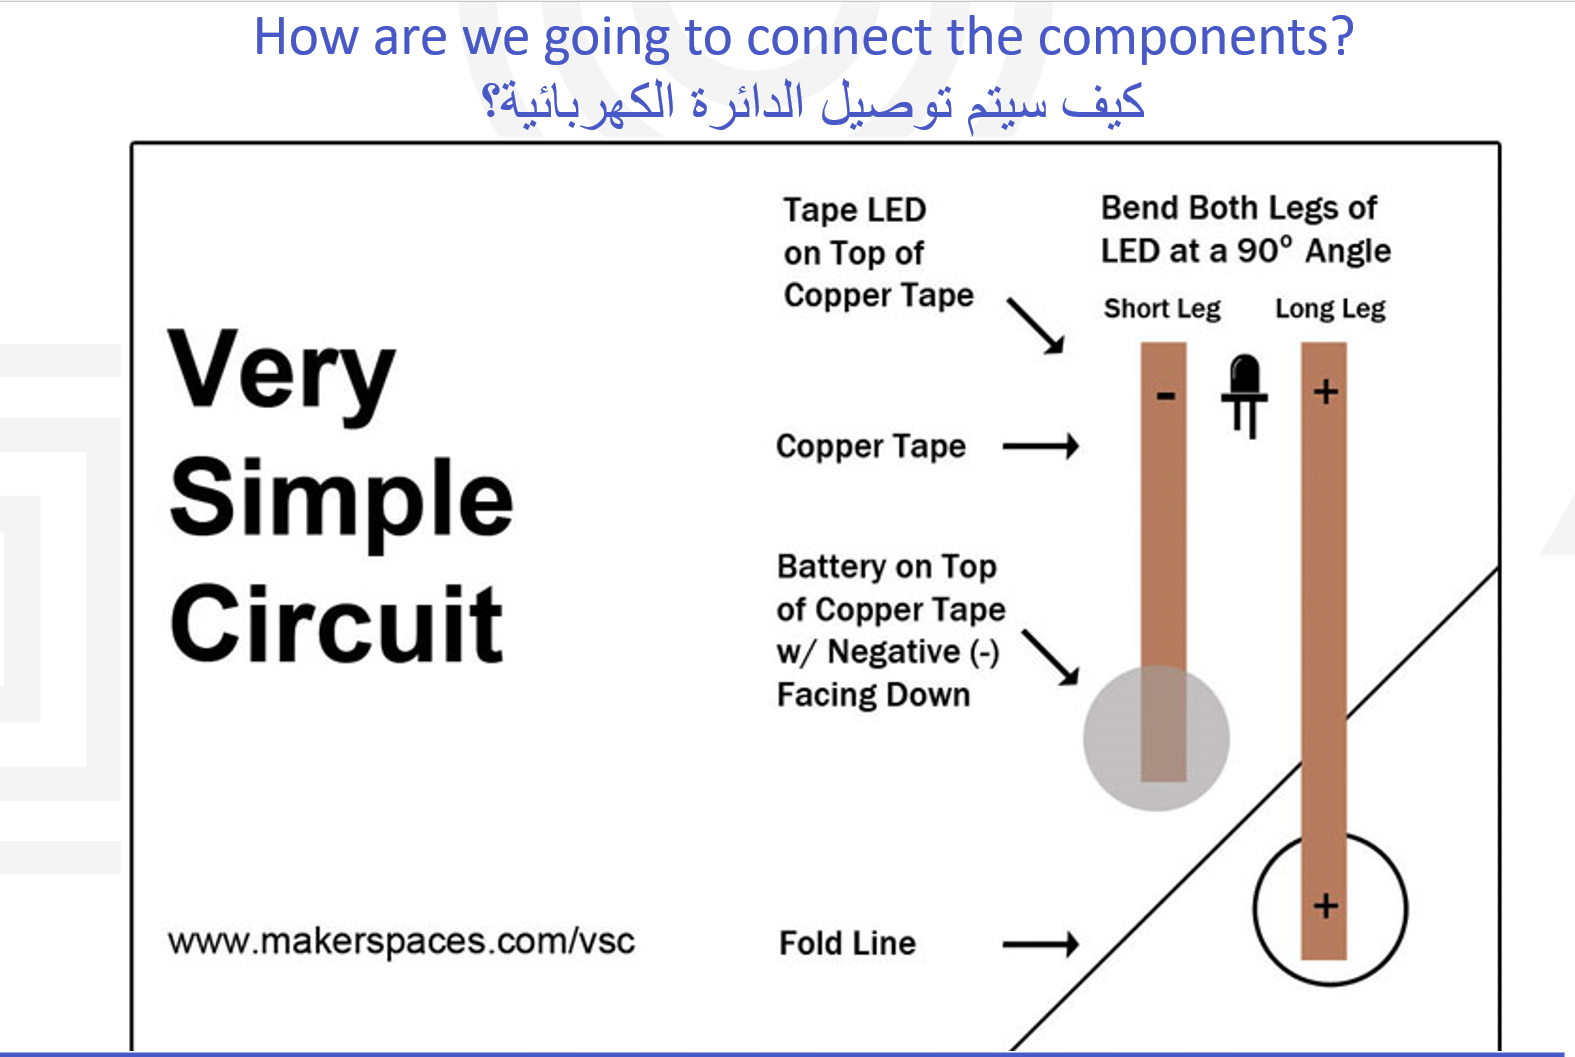 3- Ask the participants what is an electric circuit.